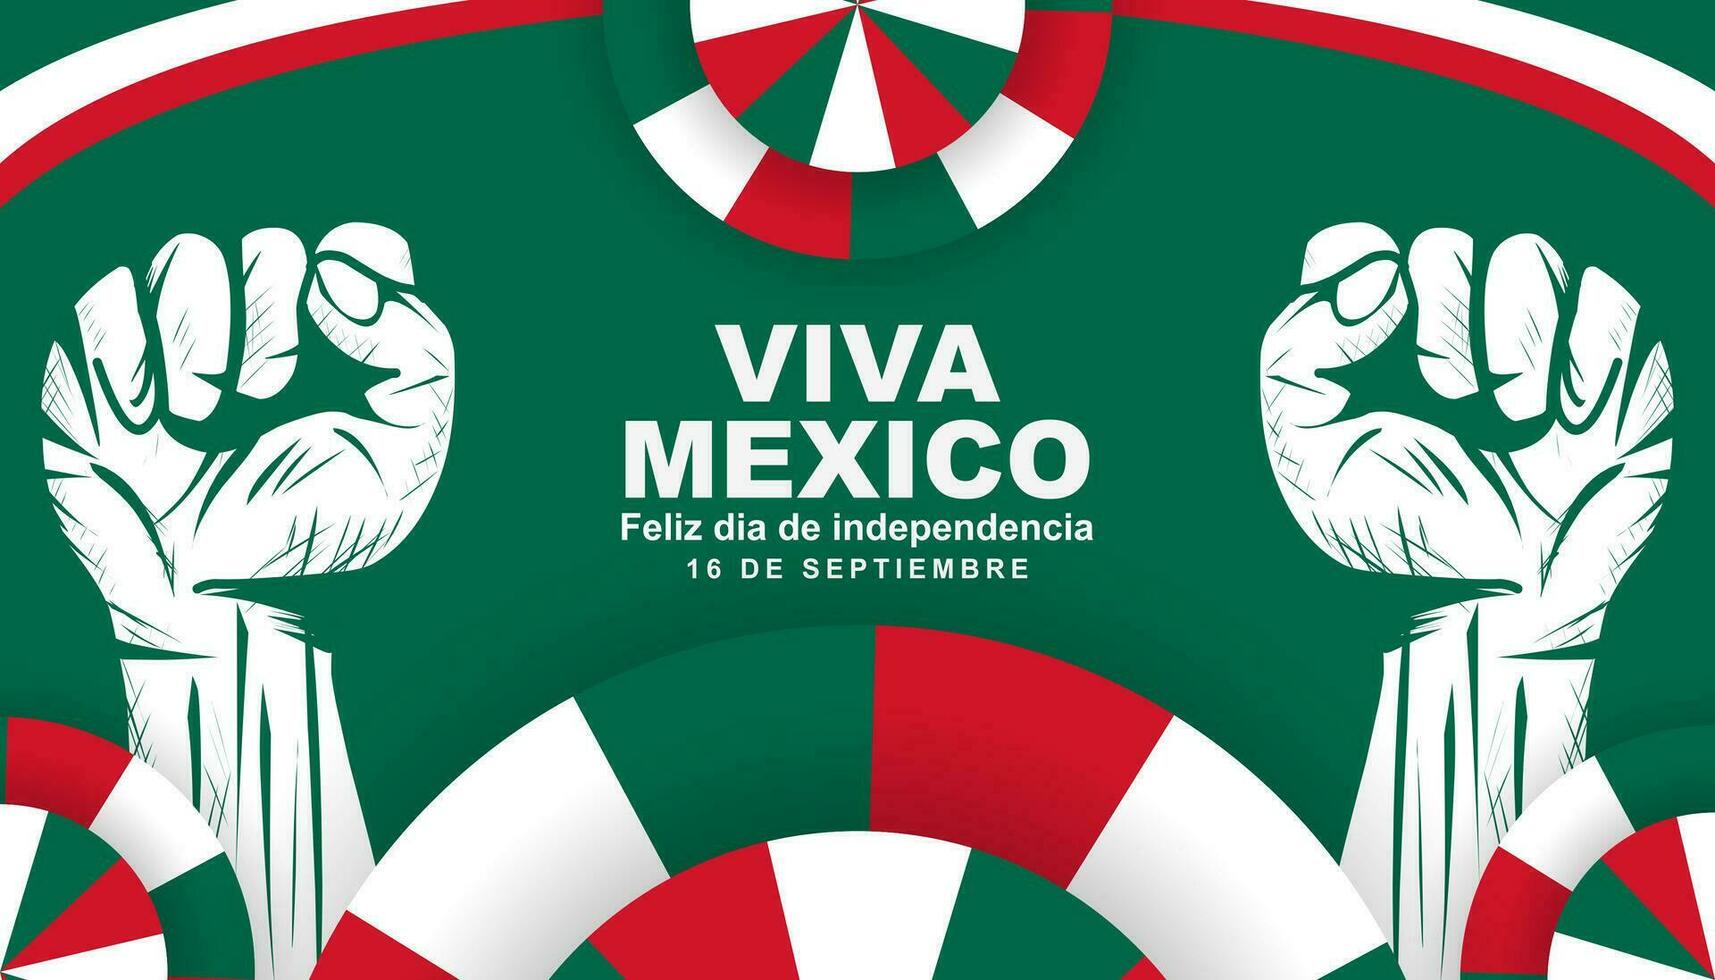 Mexico Independence day celebrated every year on september 16th, independence day greeting card poster. Vector illustration design